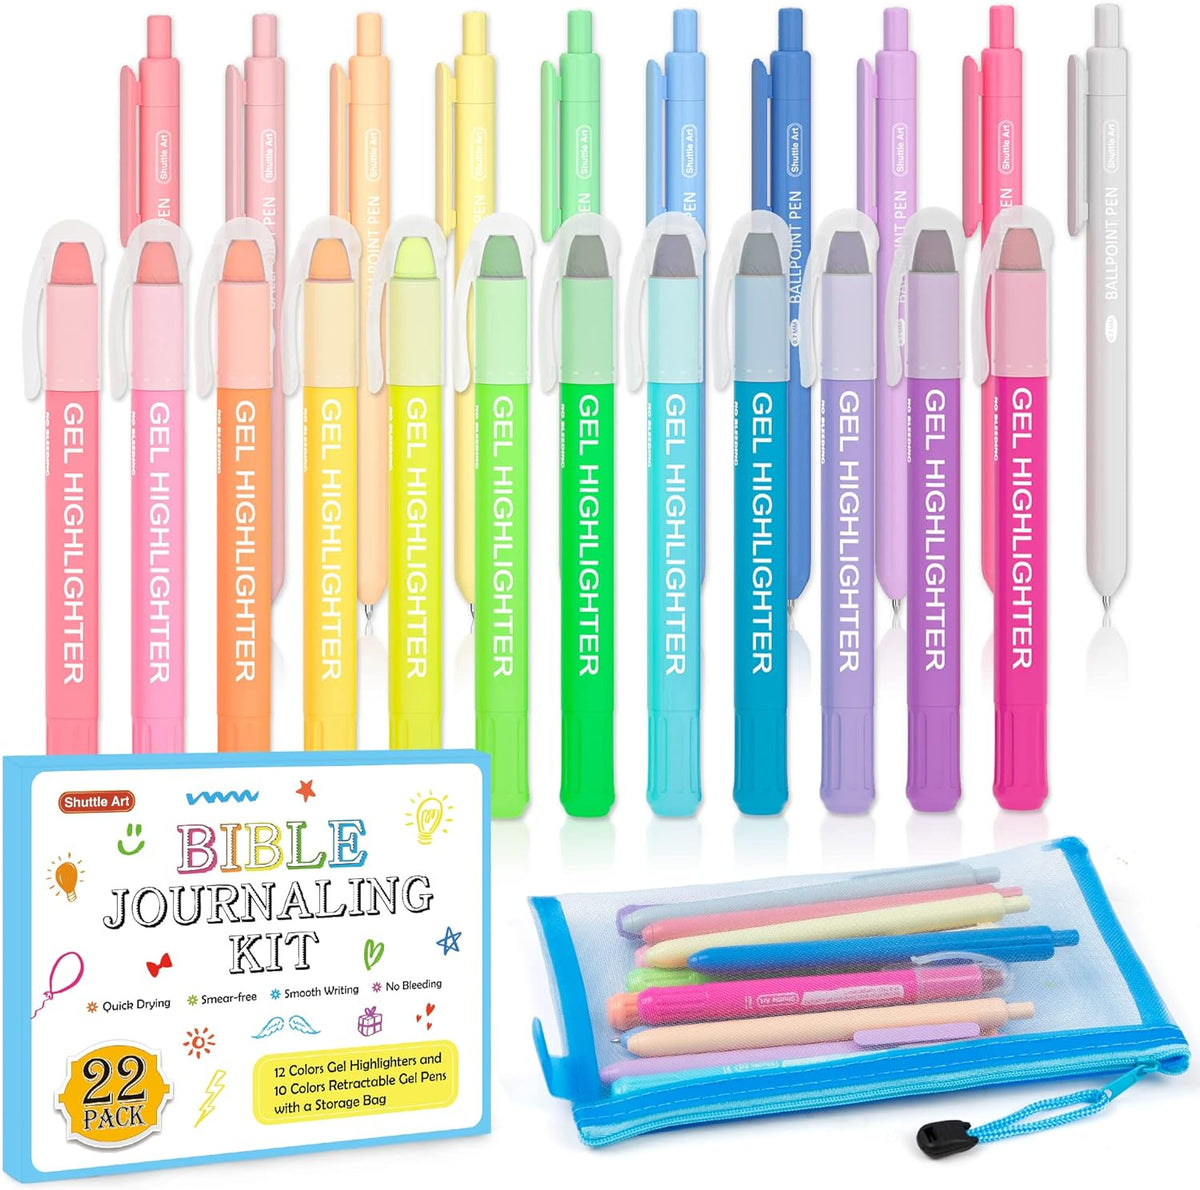 Shuttle Art Bible Highlighters and Pens No Bleed, 12 Pastel Colors Gel Highlighters No Bleed Through, Bible Journaling Supplies, Great for